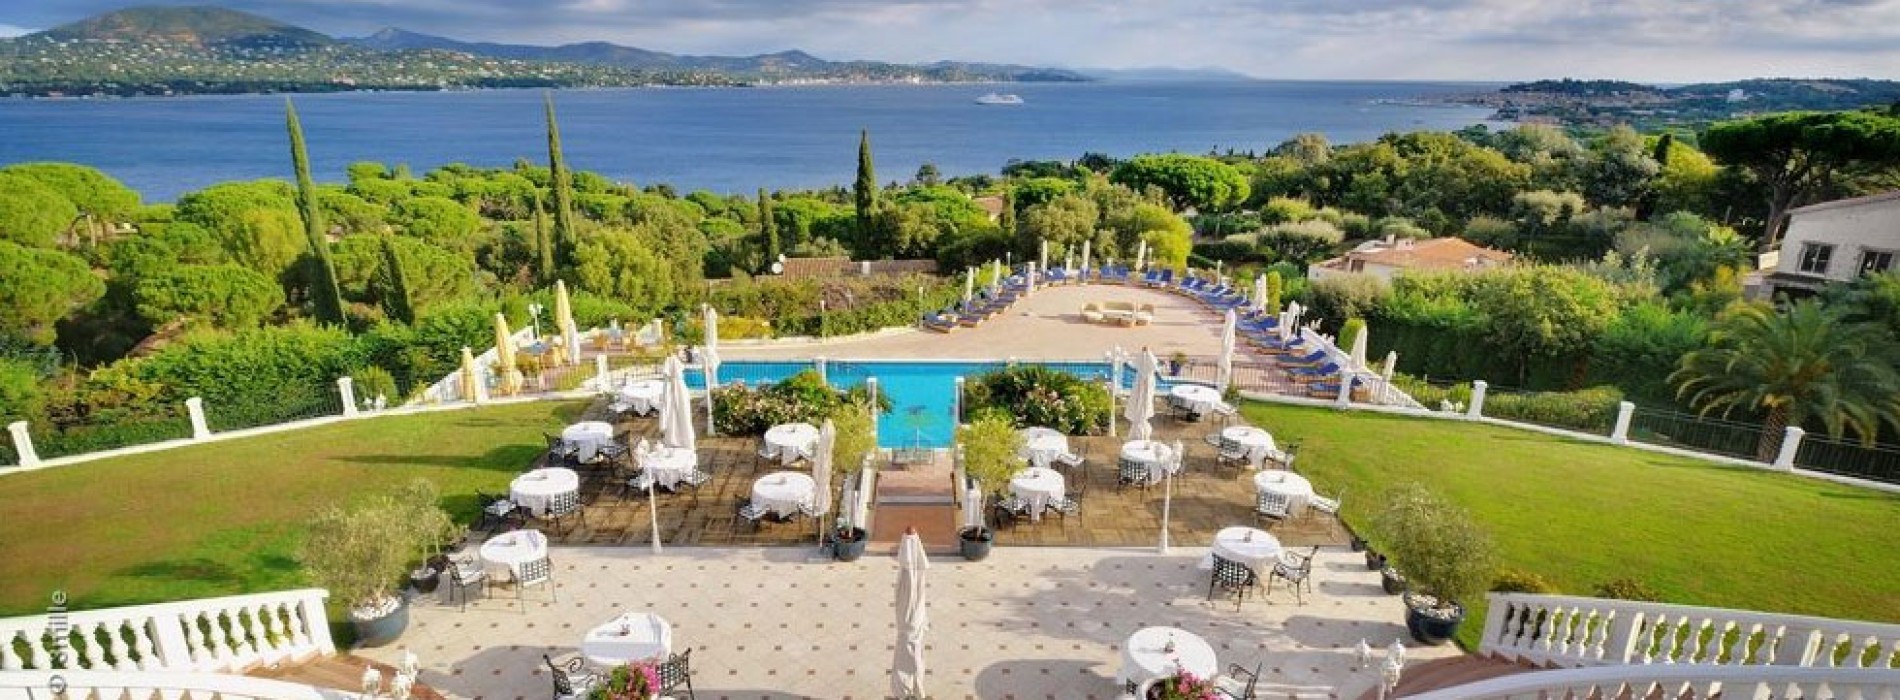 Althoff Hotel Villa Belrose In Saint-Tropez joins Small Luxury Hotels Of The World™